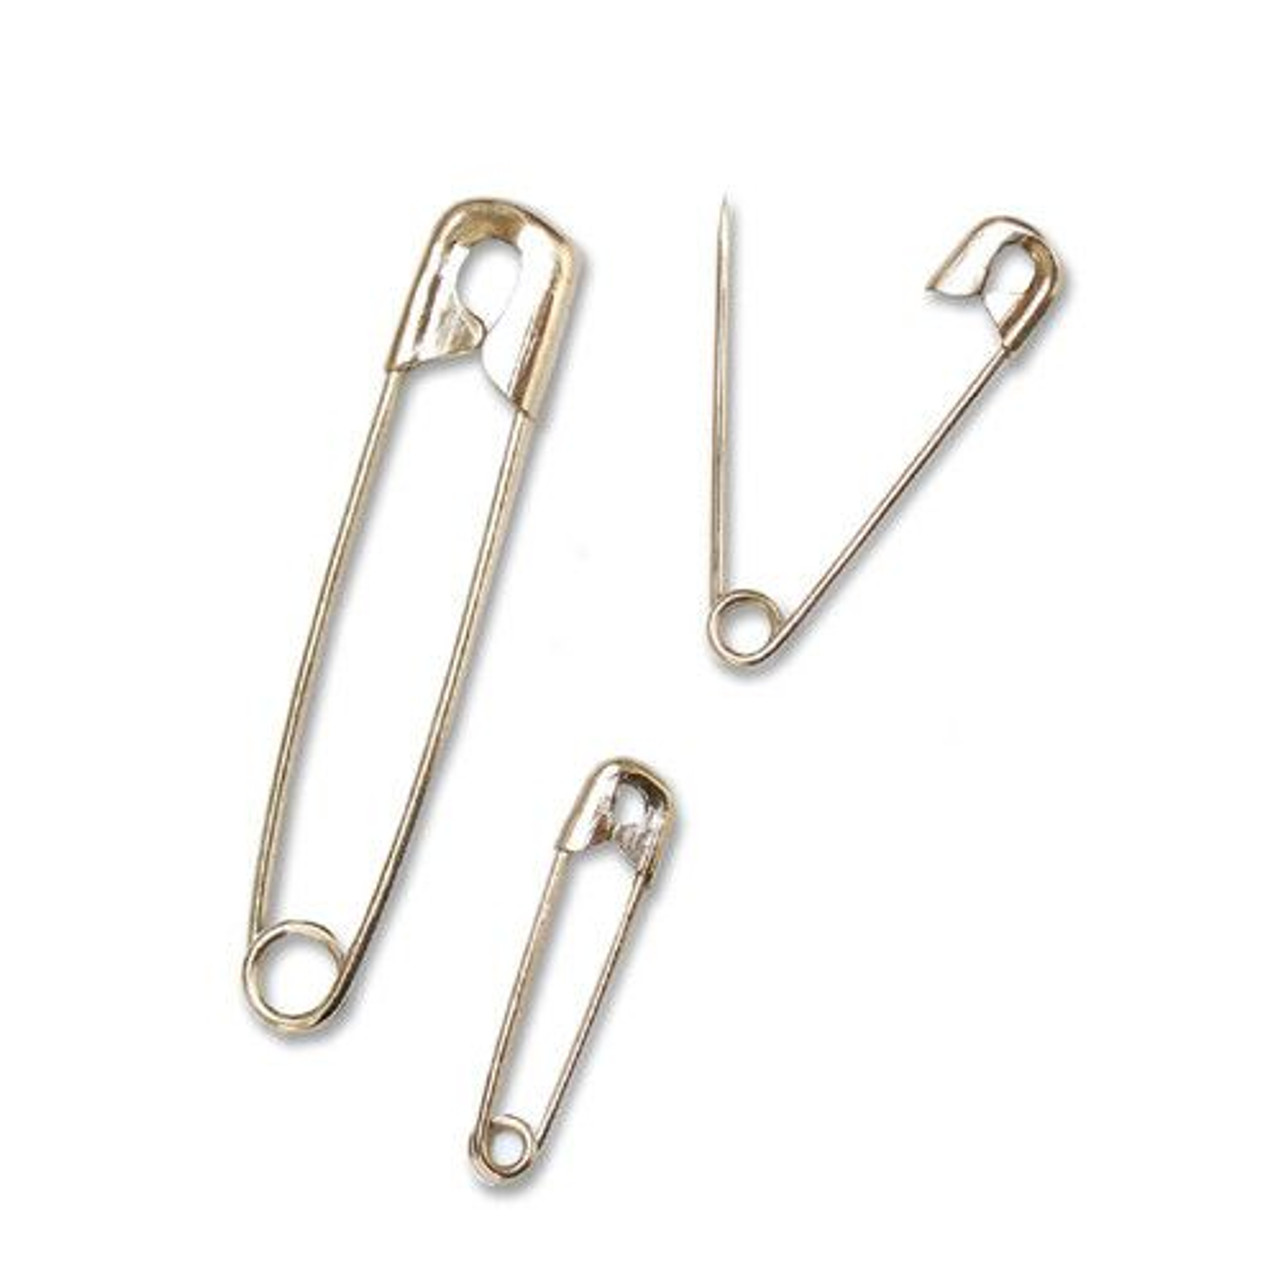 Baumgarten's Safety Pins, Assorted Sizes, Bag of 22 - Unity Store